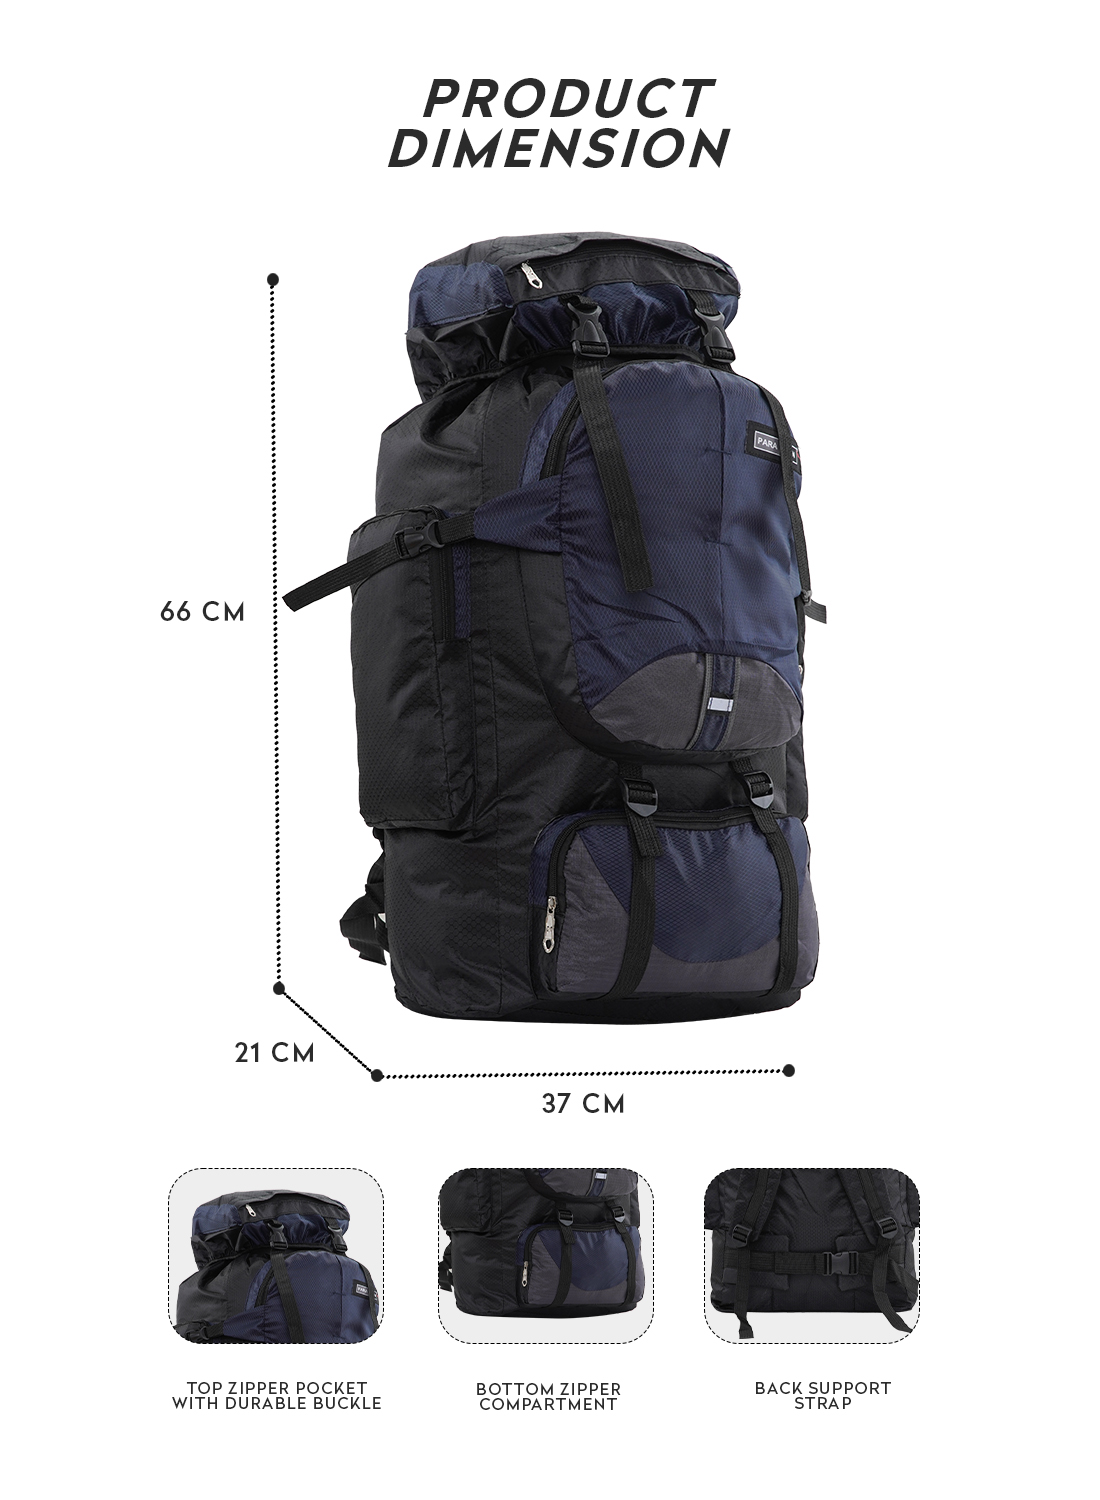 Para John Top Class Mountain Bag, perfect travel partner, multipurpose bags suits for trips and trekking, unisex heavy backpacks